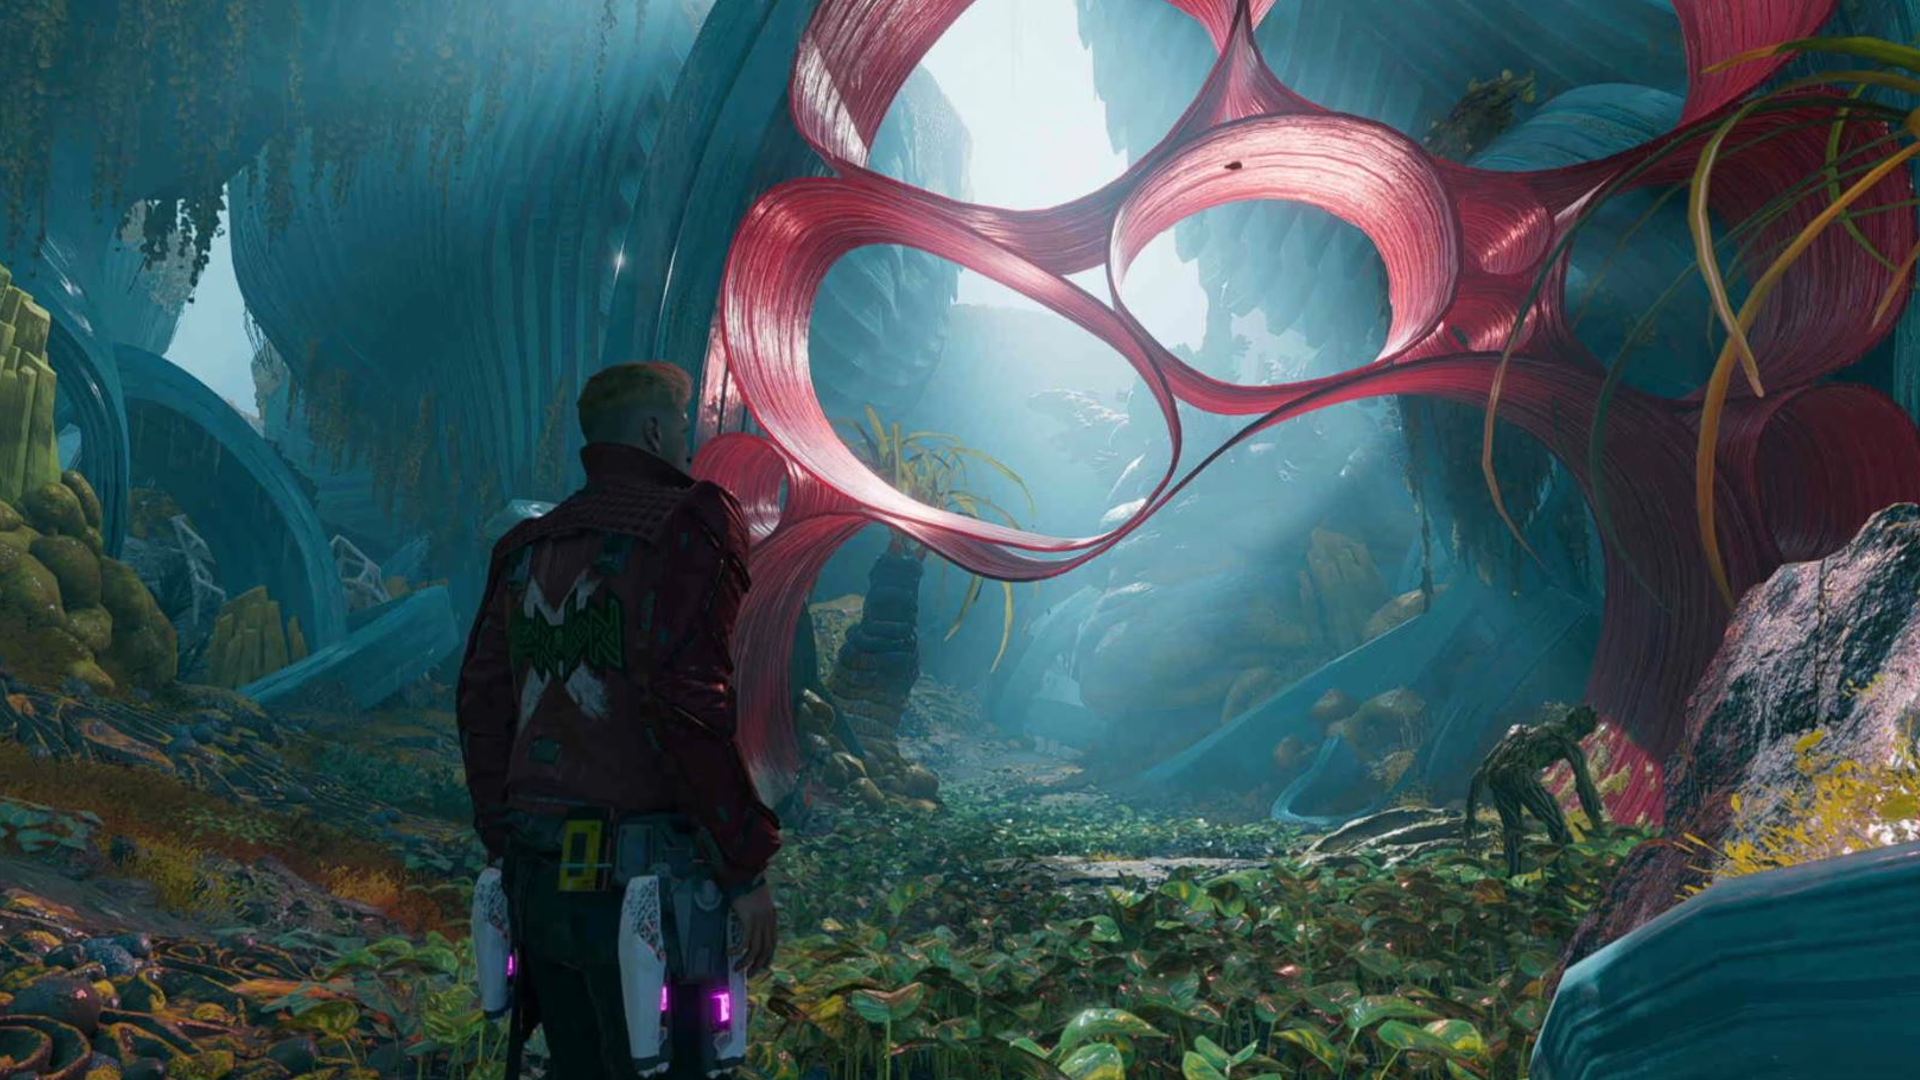 Guardians of the Galaxy outfit locations: Star-Lord can be seen staring at a blue plant with red, circular vegetation growing around it.